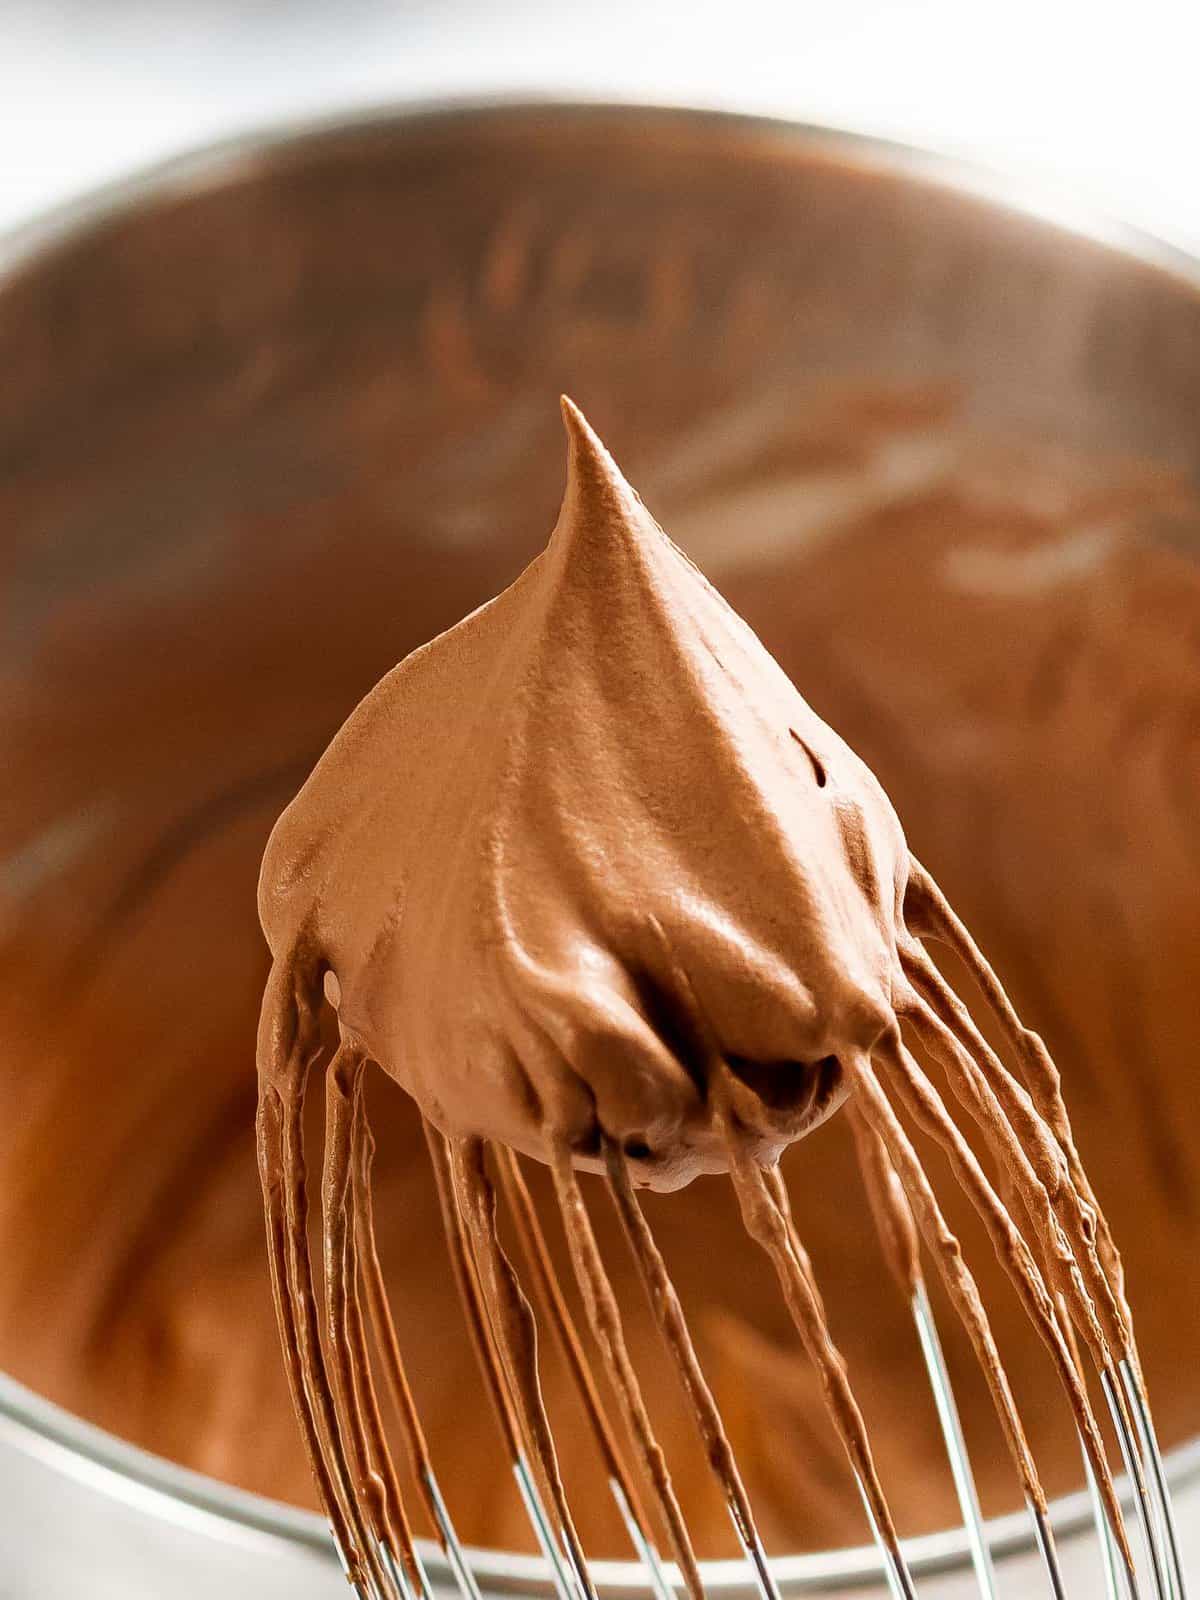 Fluffy homemade chocolate whipped cream on the end of a whisk.